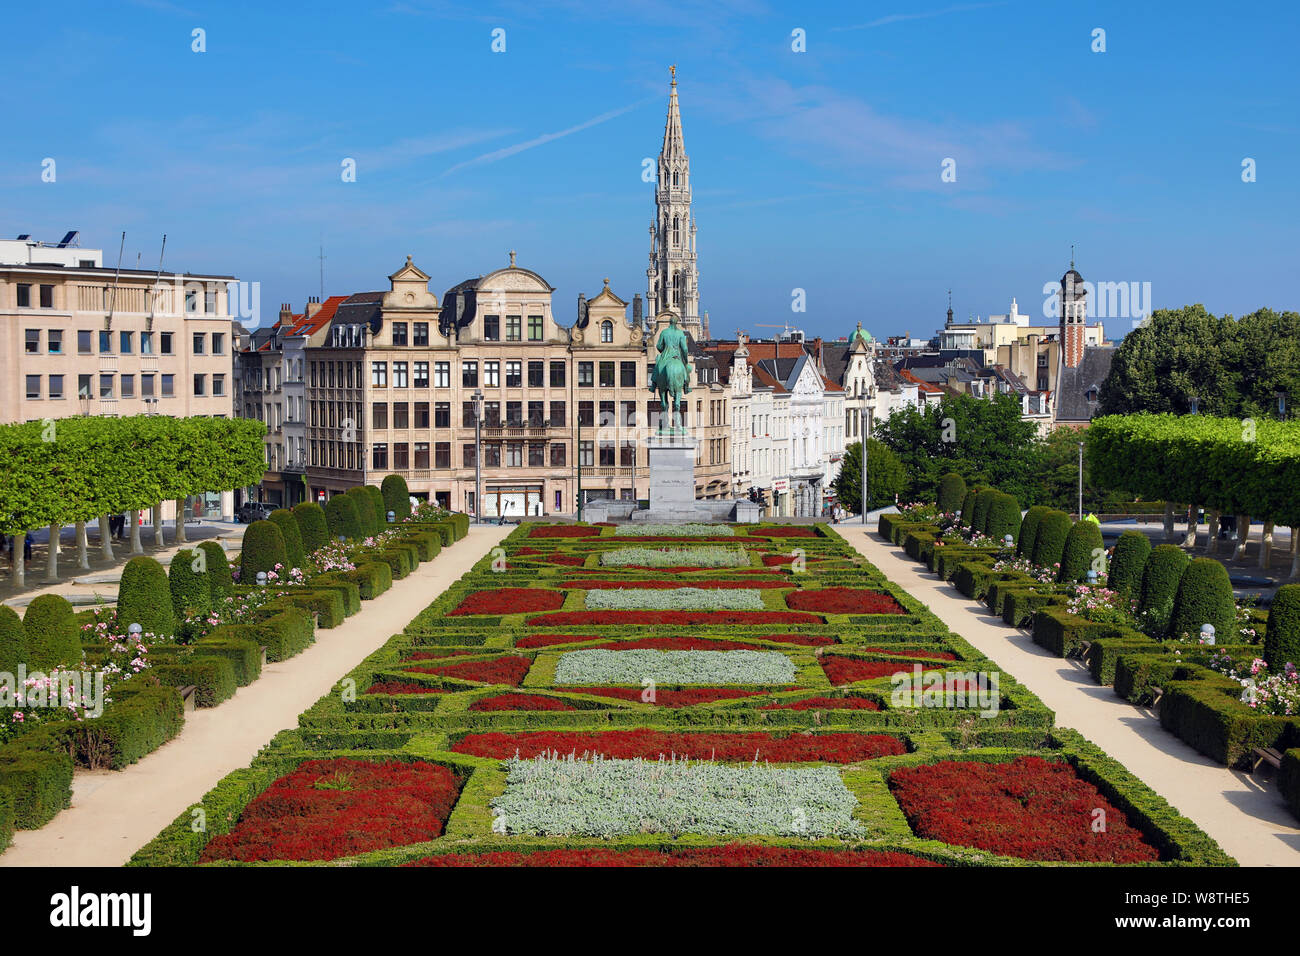 Mont des Arts Gardens and Tower of the Town Hall, Brussels, Belgium Stock Photo